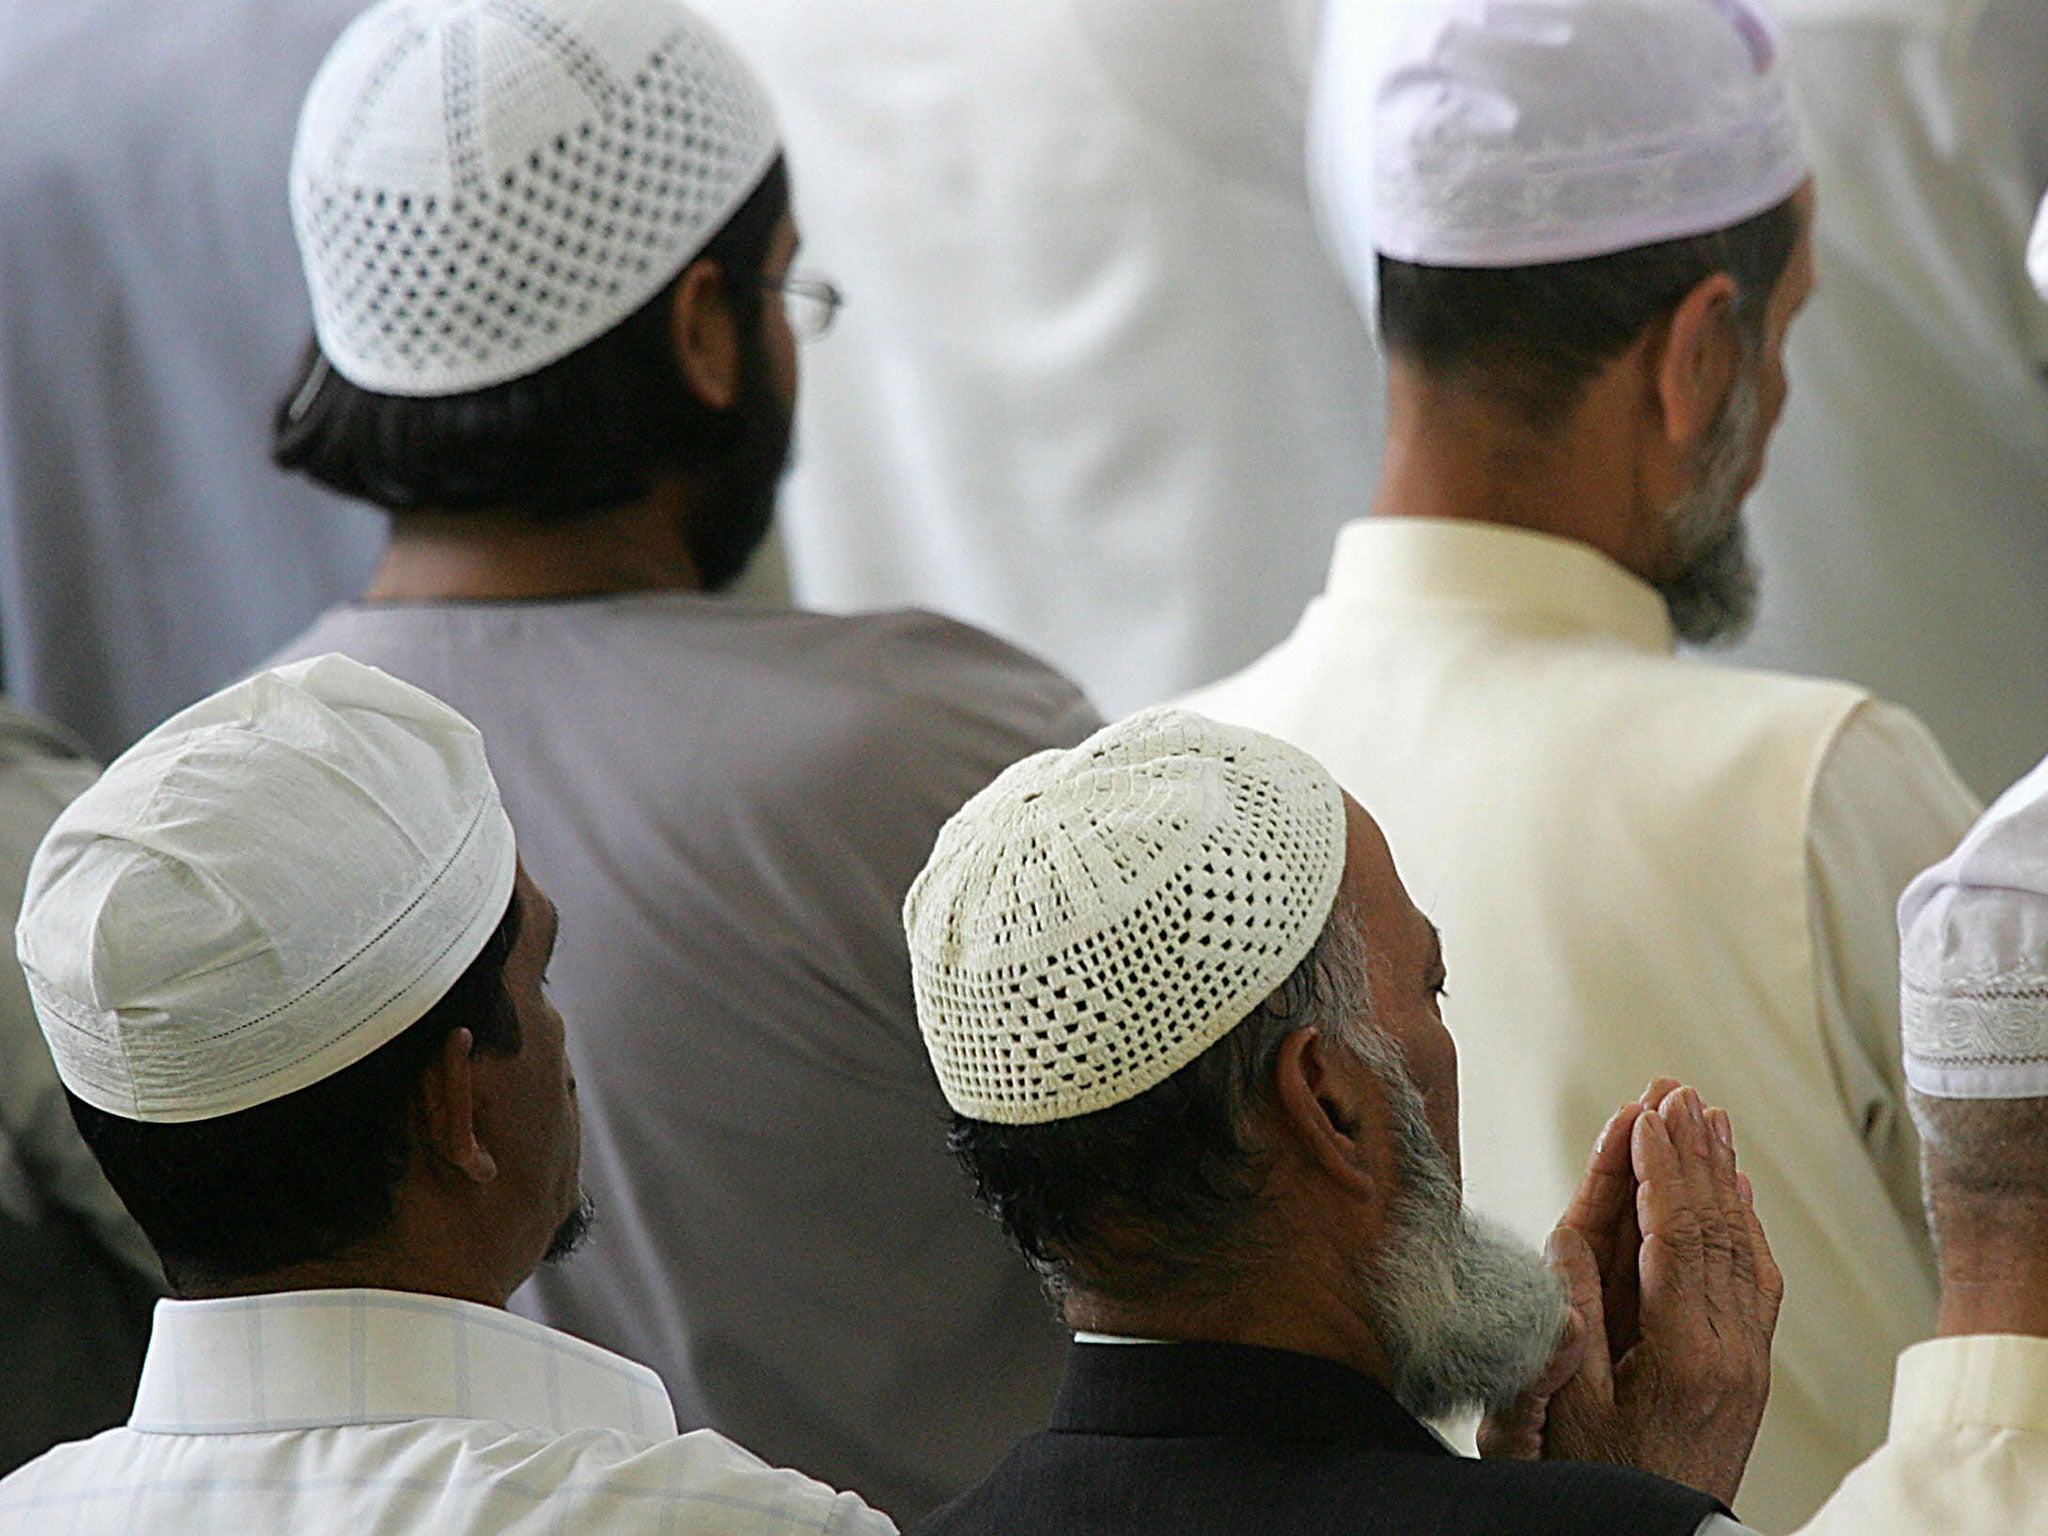 A Channel 4 poll has ignited a debate about British Muslim opinions